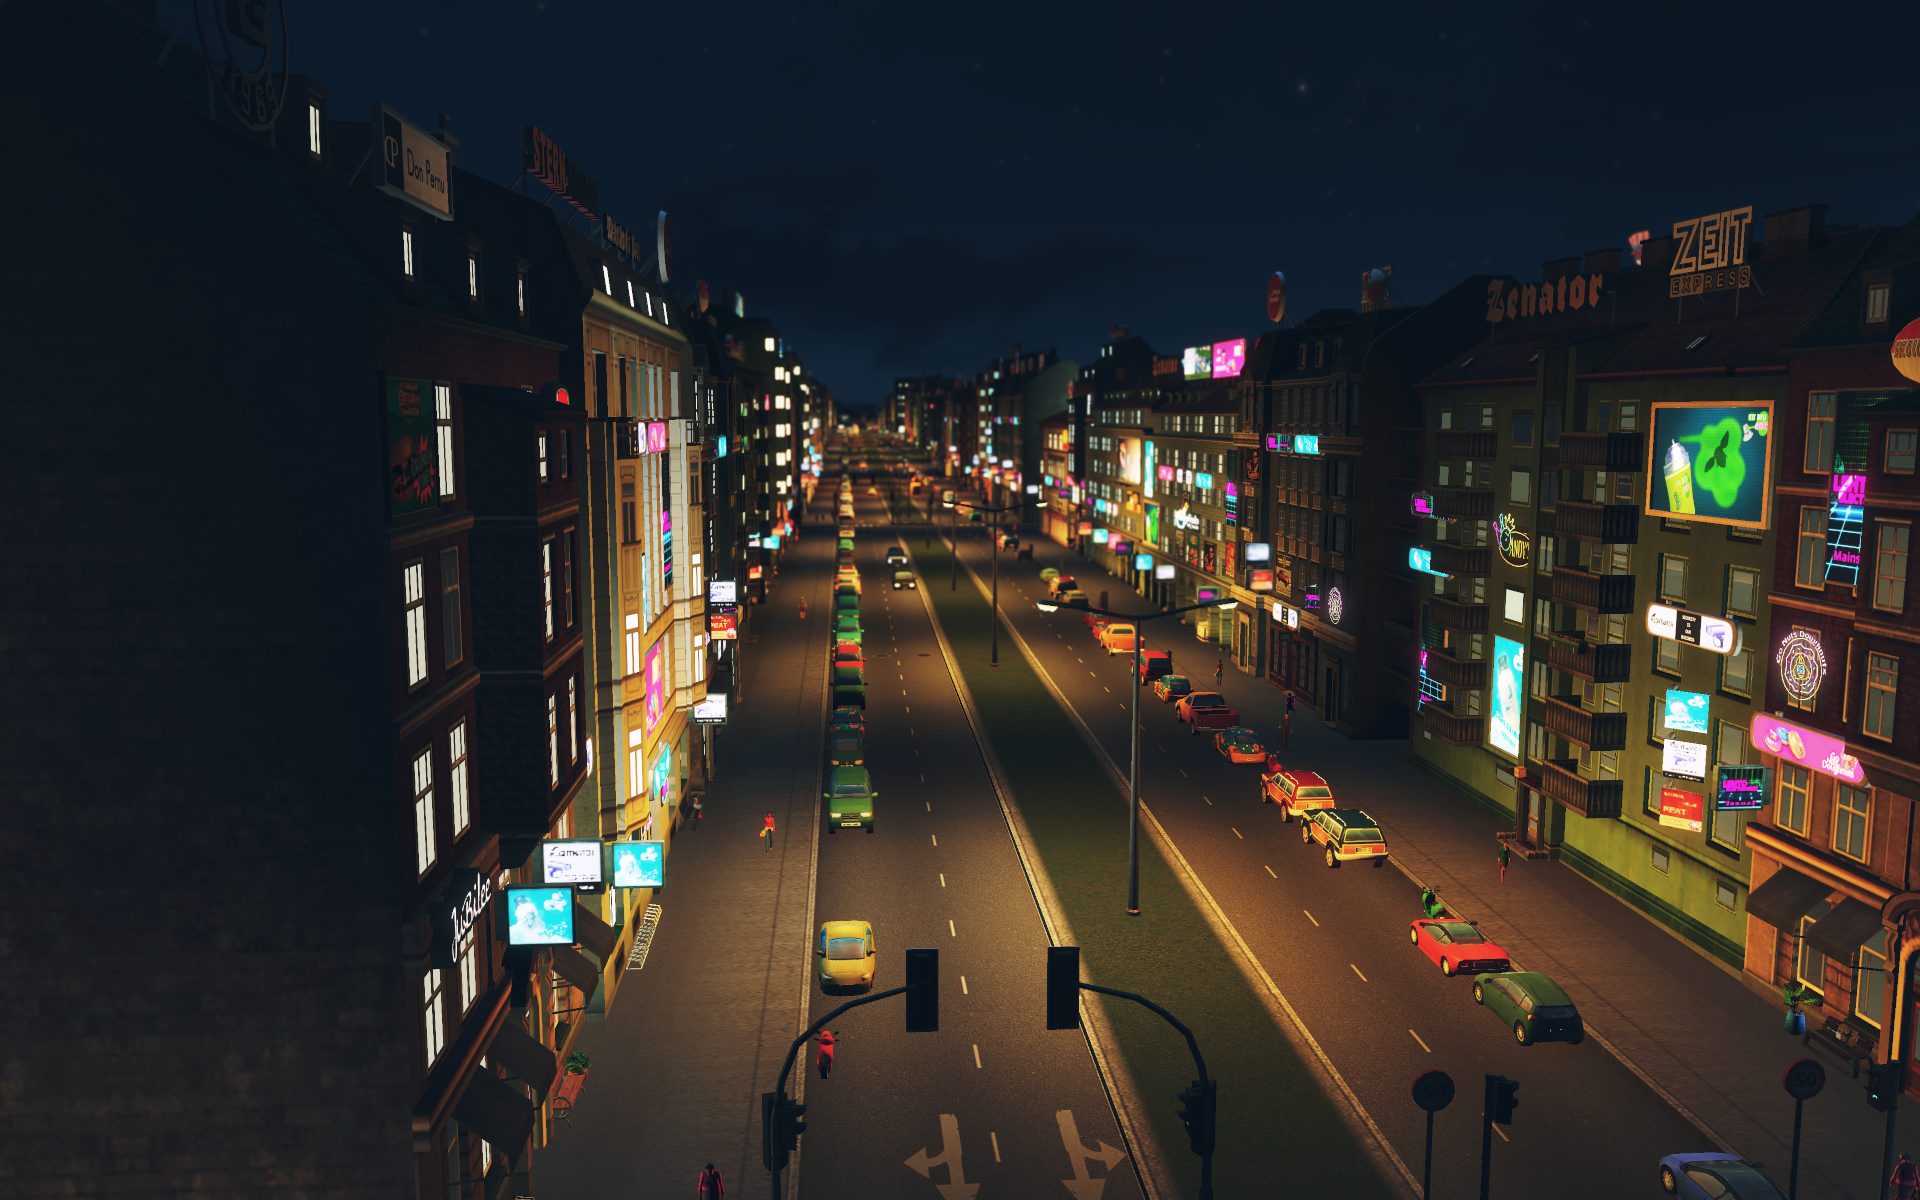 cities skylines dlc cracked retail game